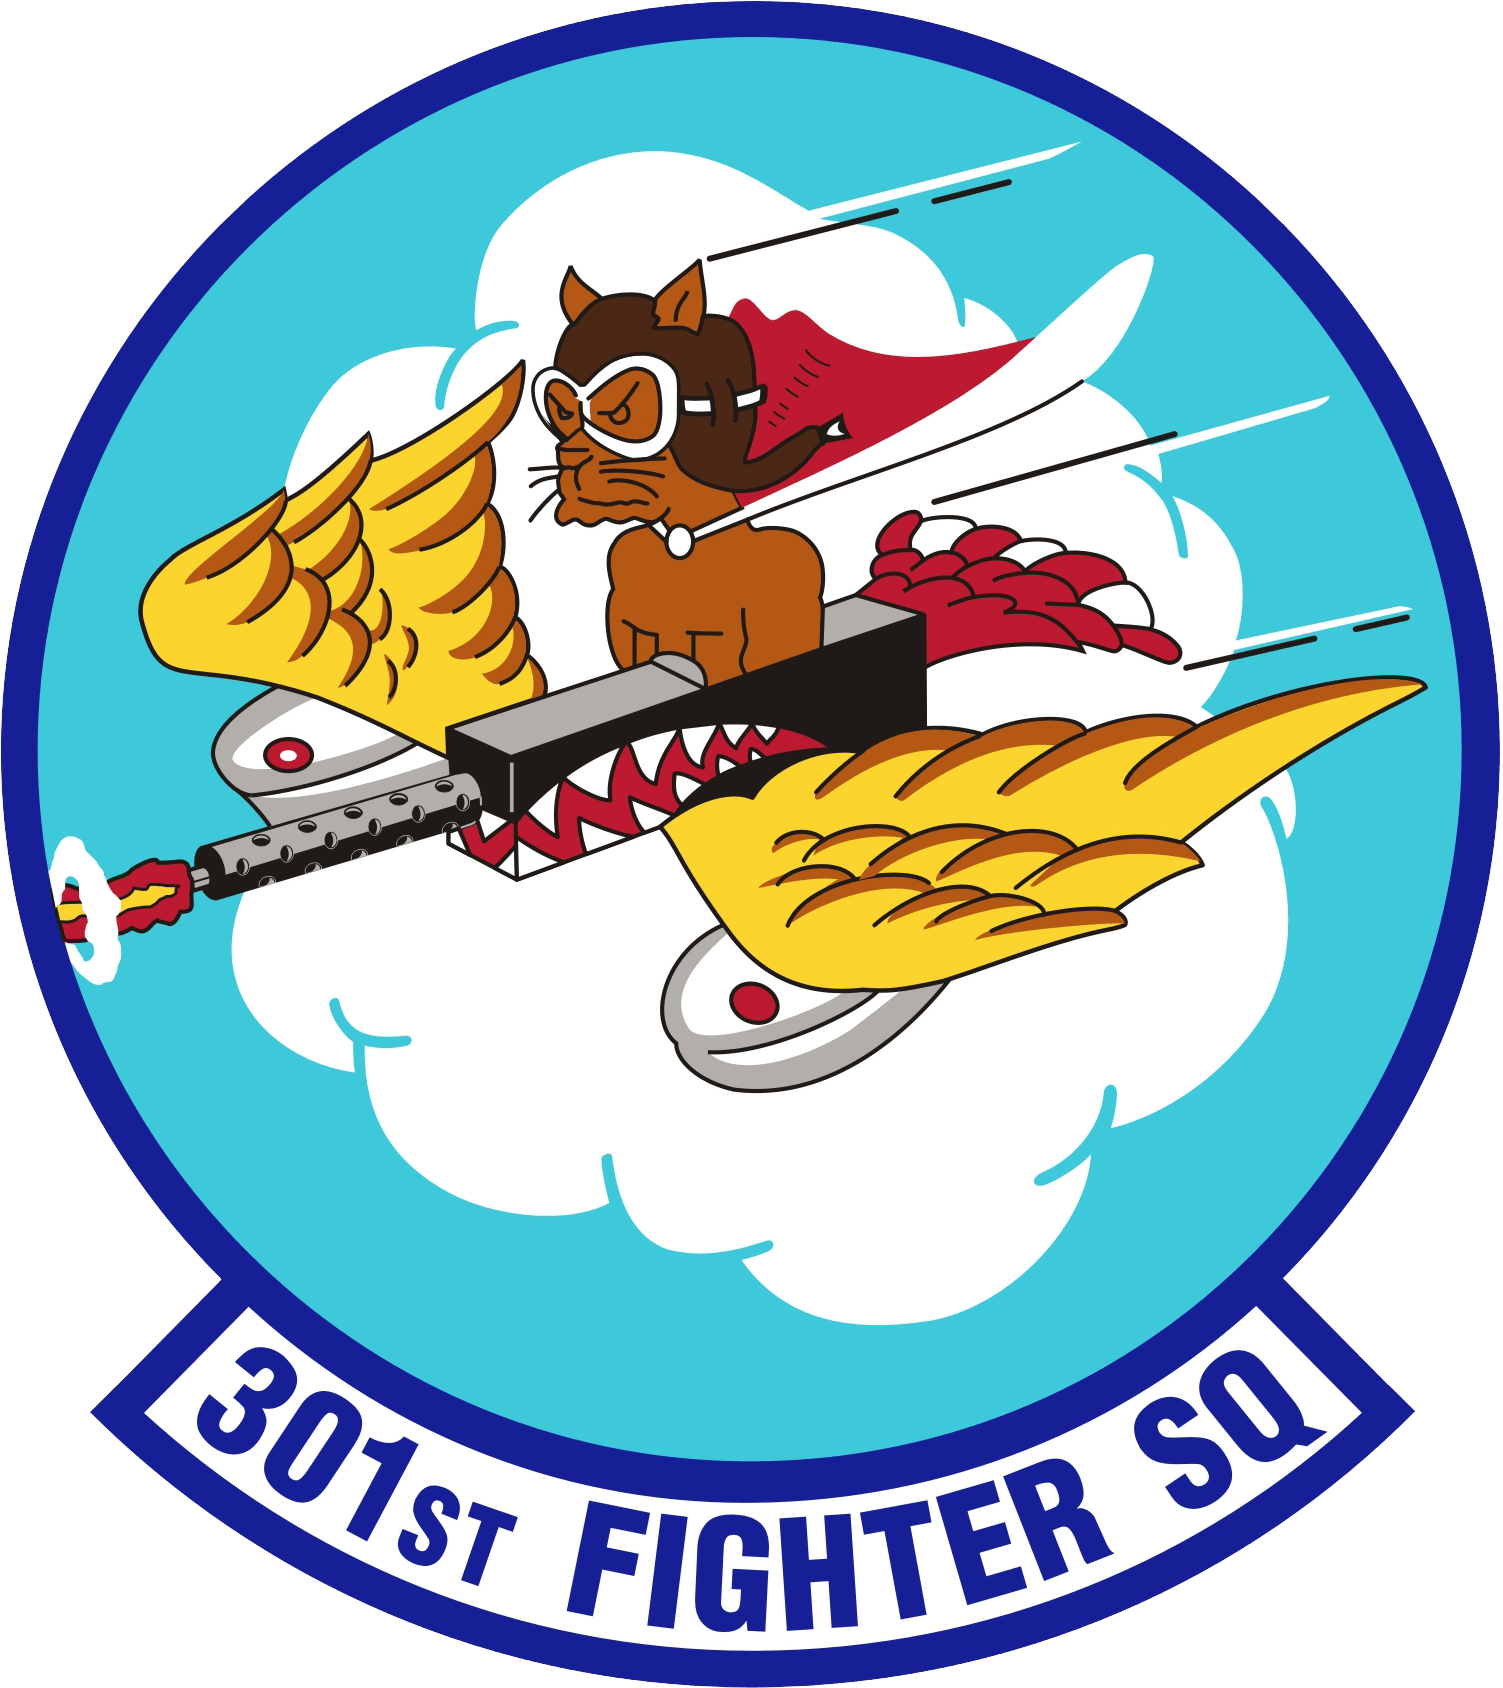 AETC Logo - 301st Fighter Squadron